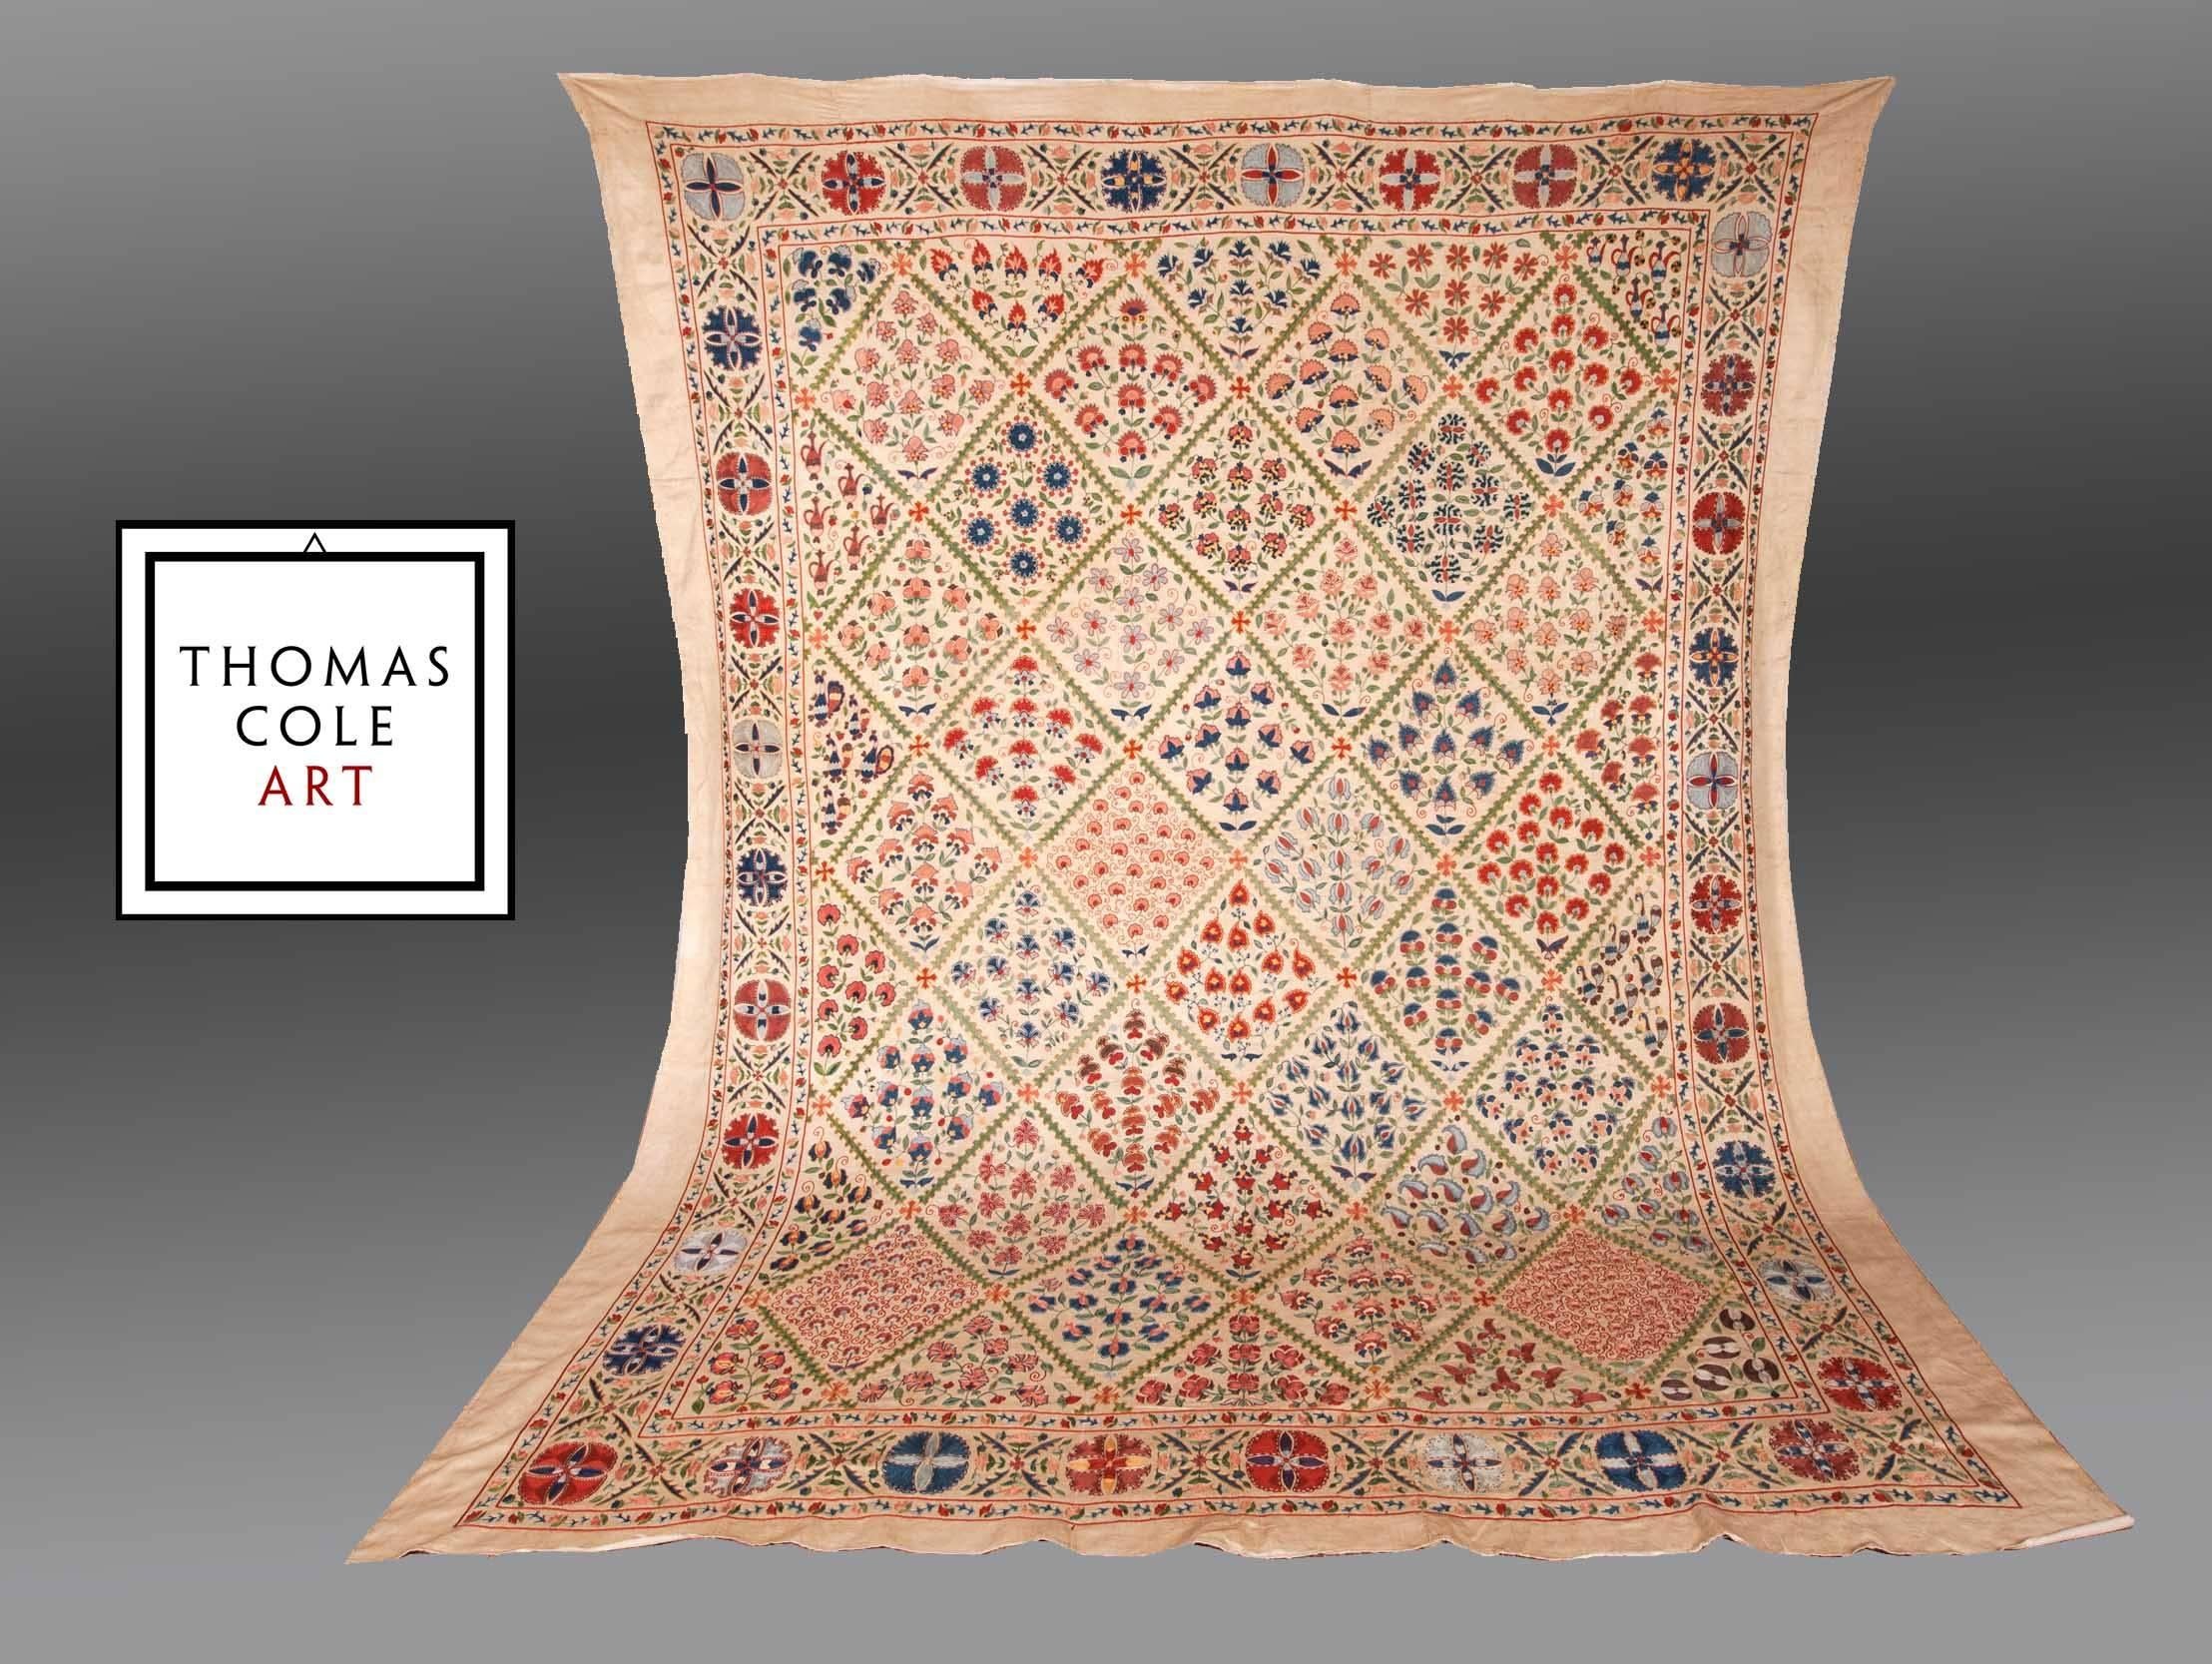 A finely executed, beautifully designed contemporary Uzbek embroidery (or 'suzani'). Quite large at 8.5 feet by 10.5 feet, it is ideally suited to be used as a luxurious bedspread or, if one has the space, an elegant wall hanging!

The